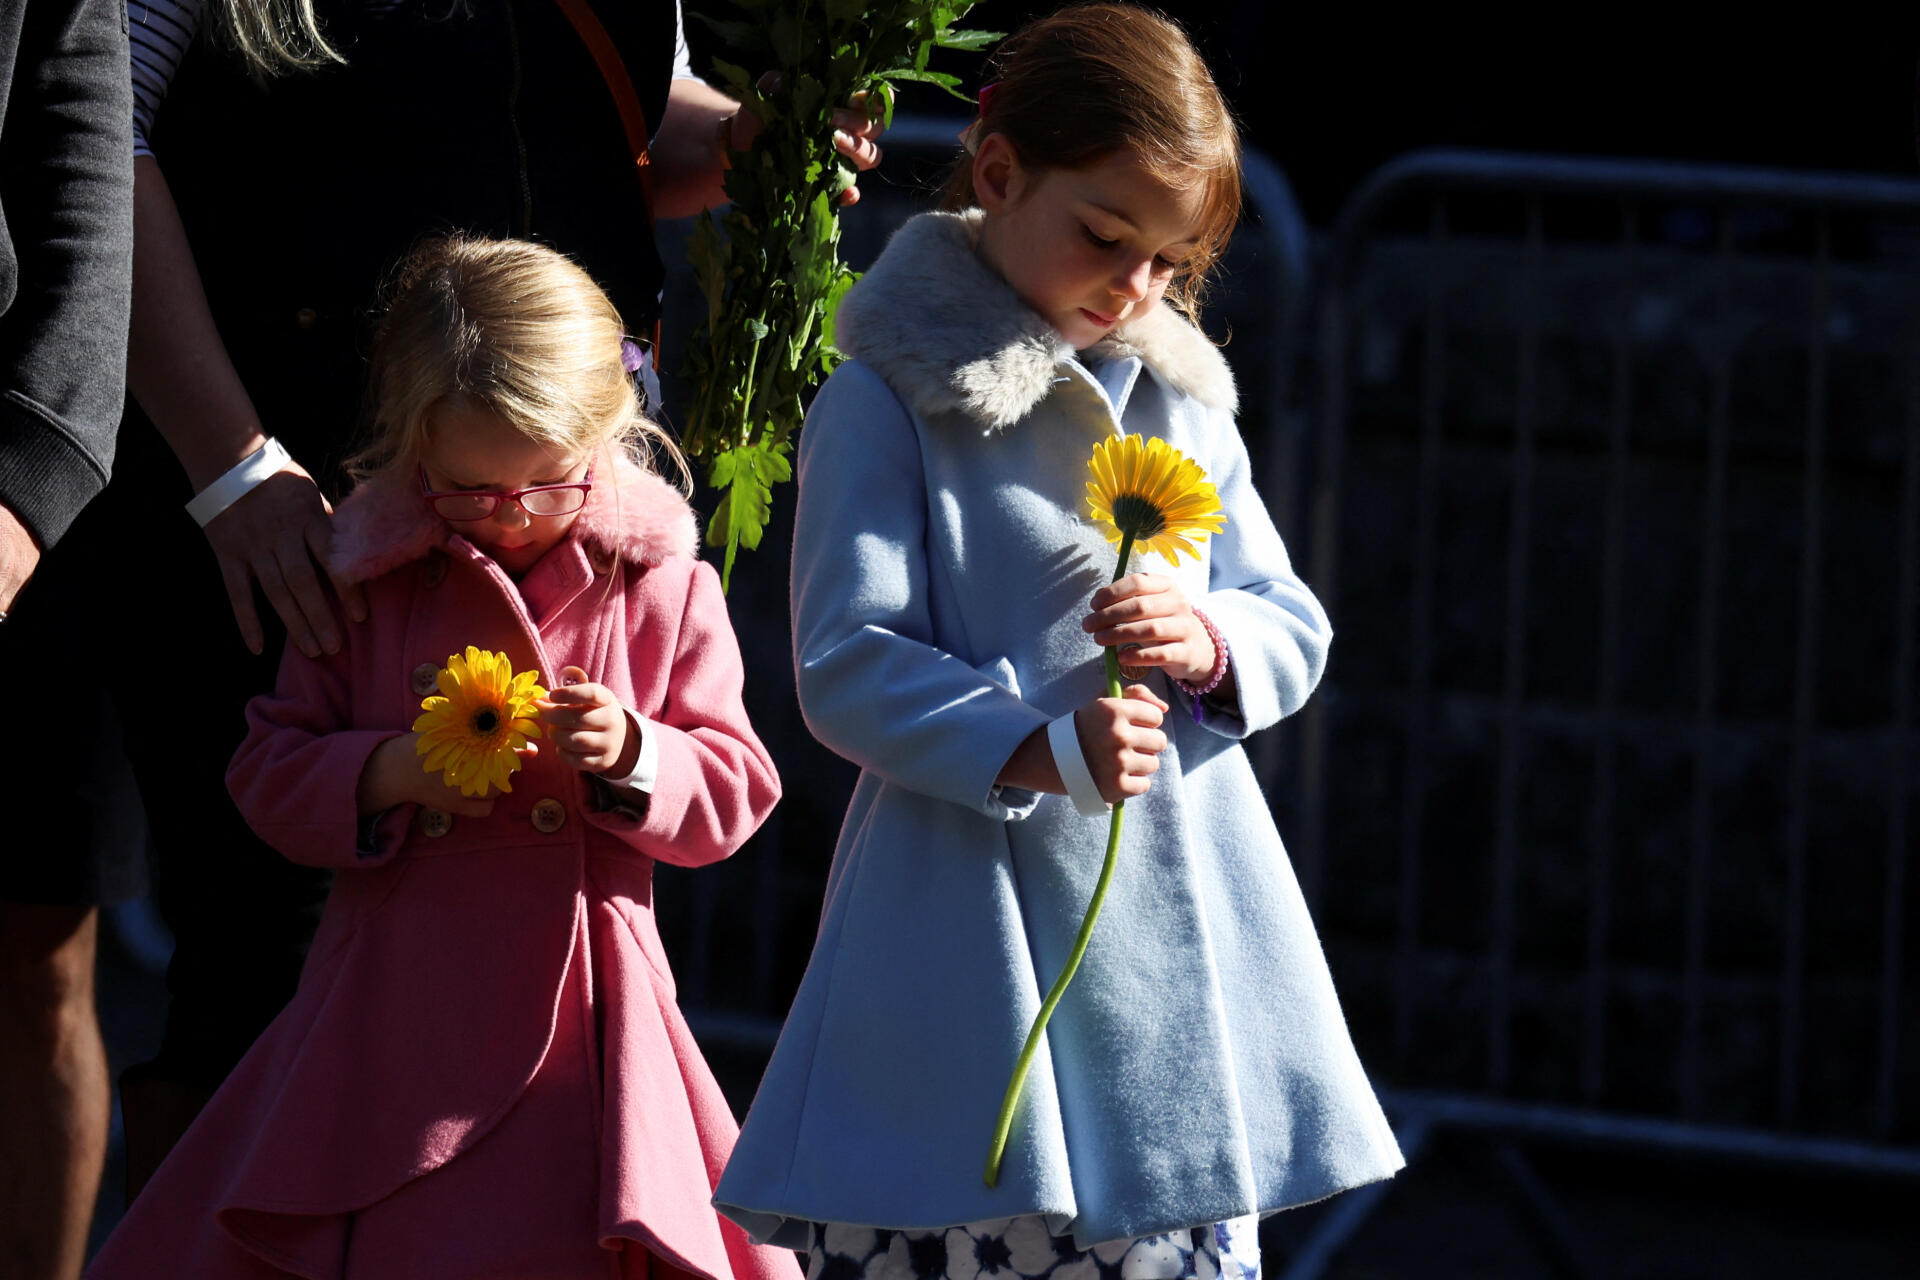 Children line up at Balmoral to pay their respects to Queen Elizabeth II, near the British Crown Castle in Scotland. September 10, 2022.